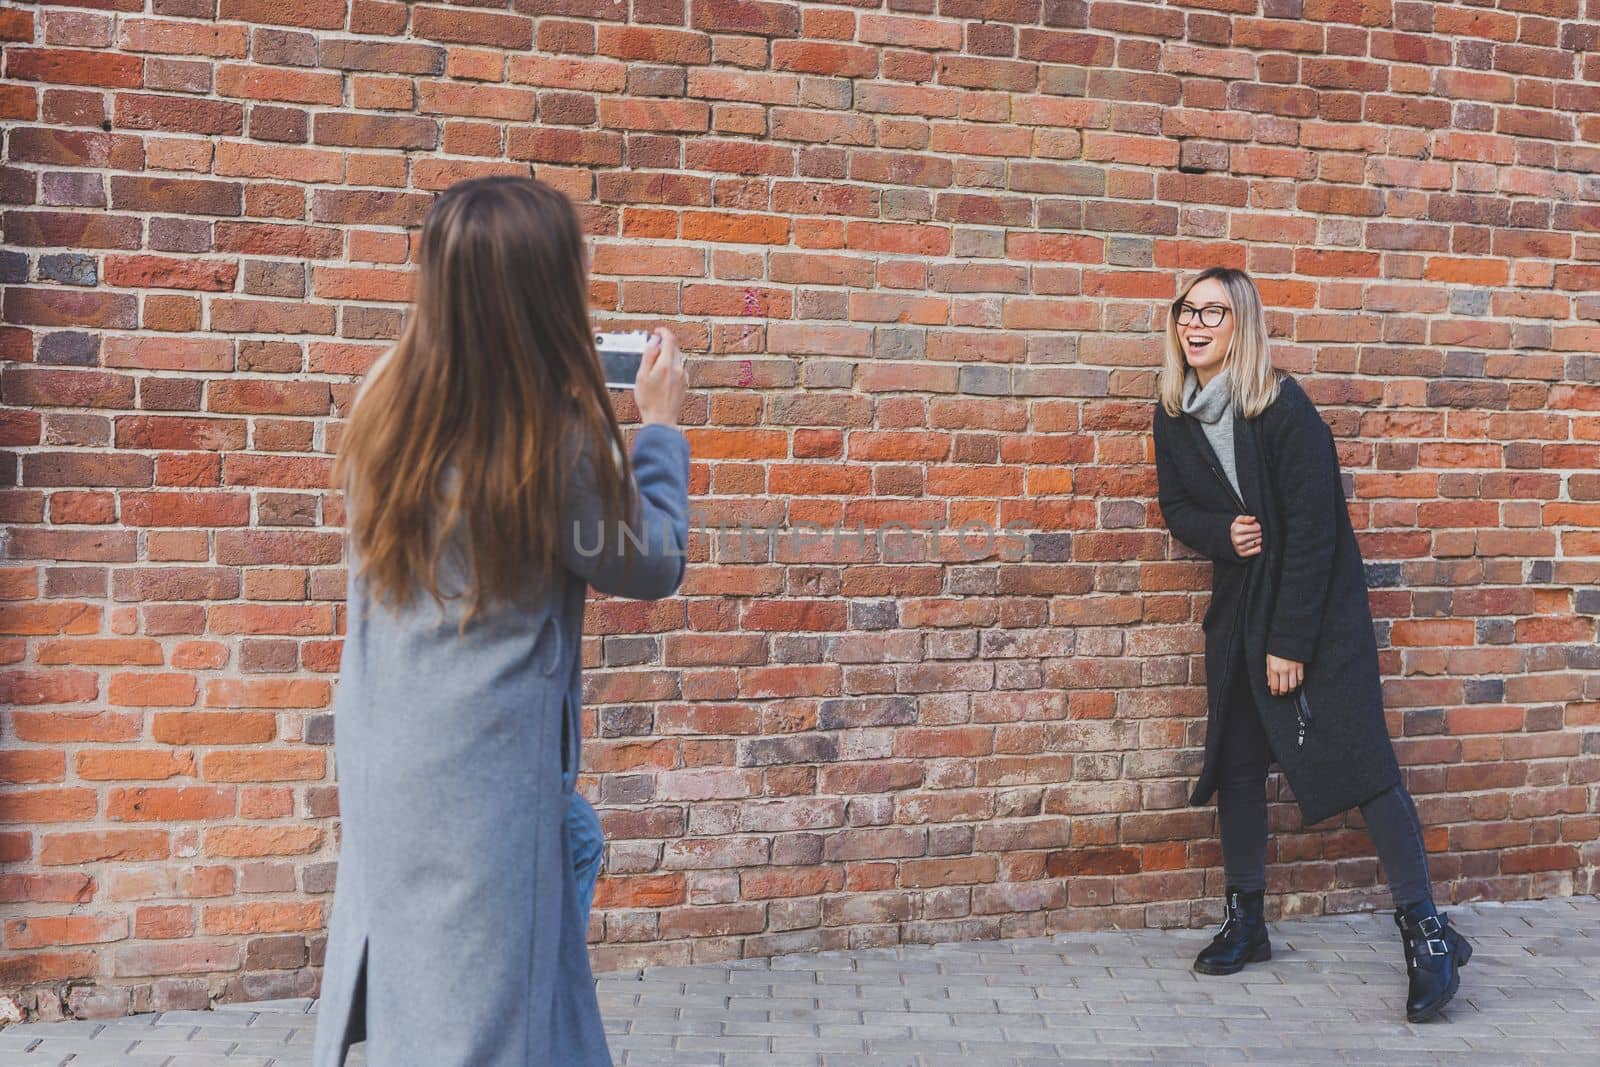 Girl takes picture of her female friend in front of brick wall in city street - photographer and vintage camera hobby concept by Satura86